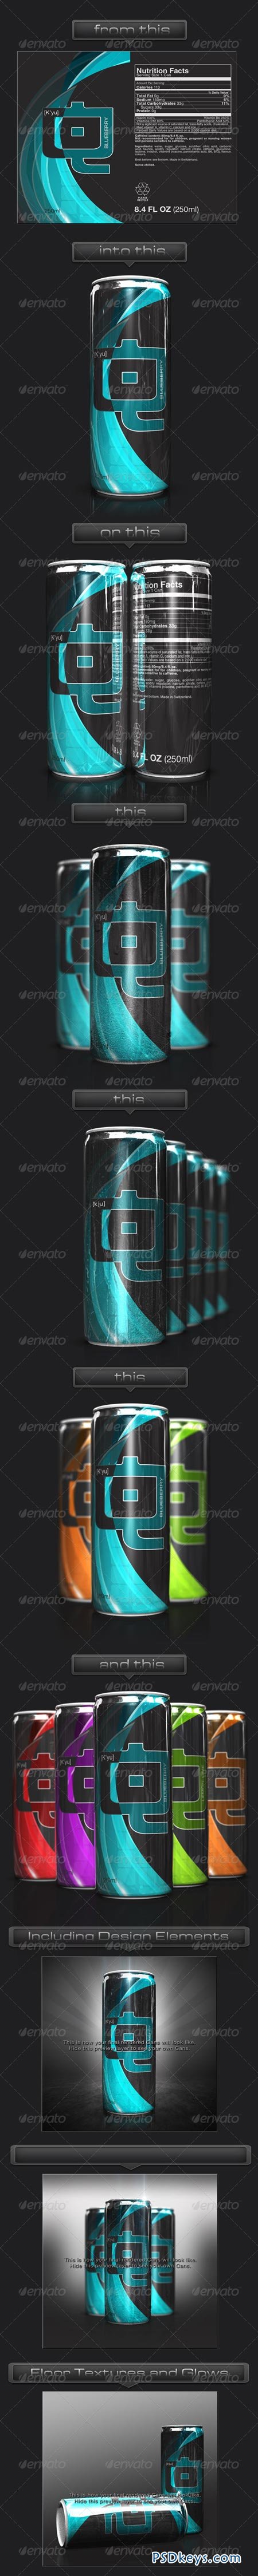 3D Energy Drink Soda Can Mockup 3526465